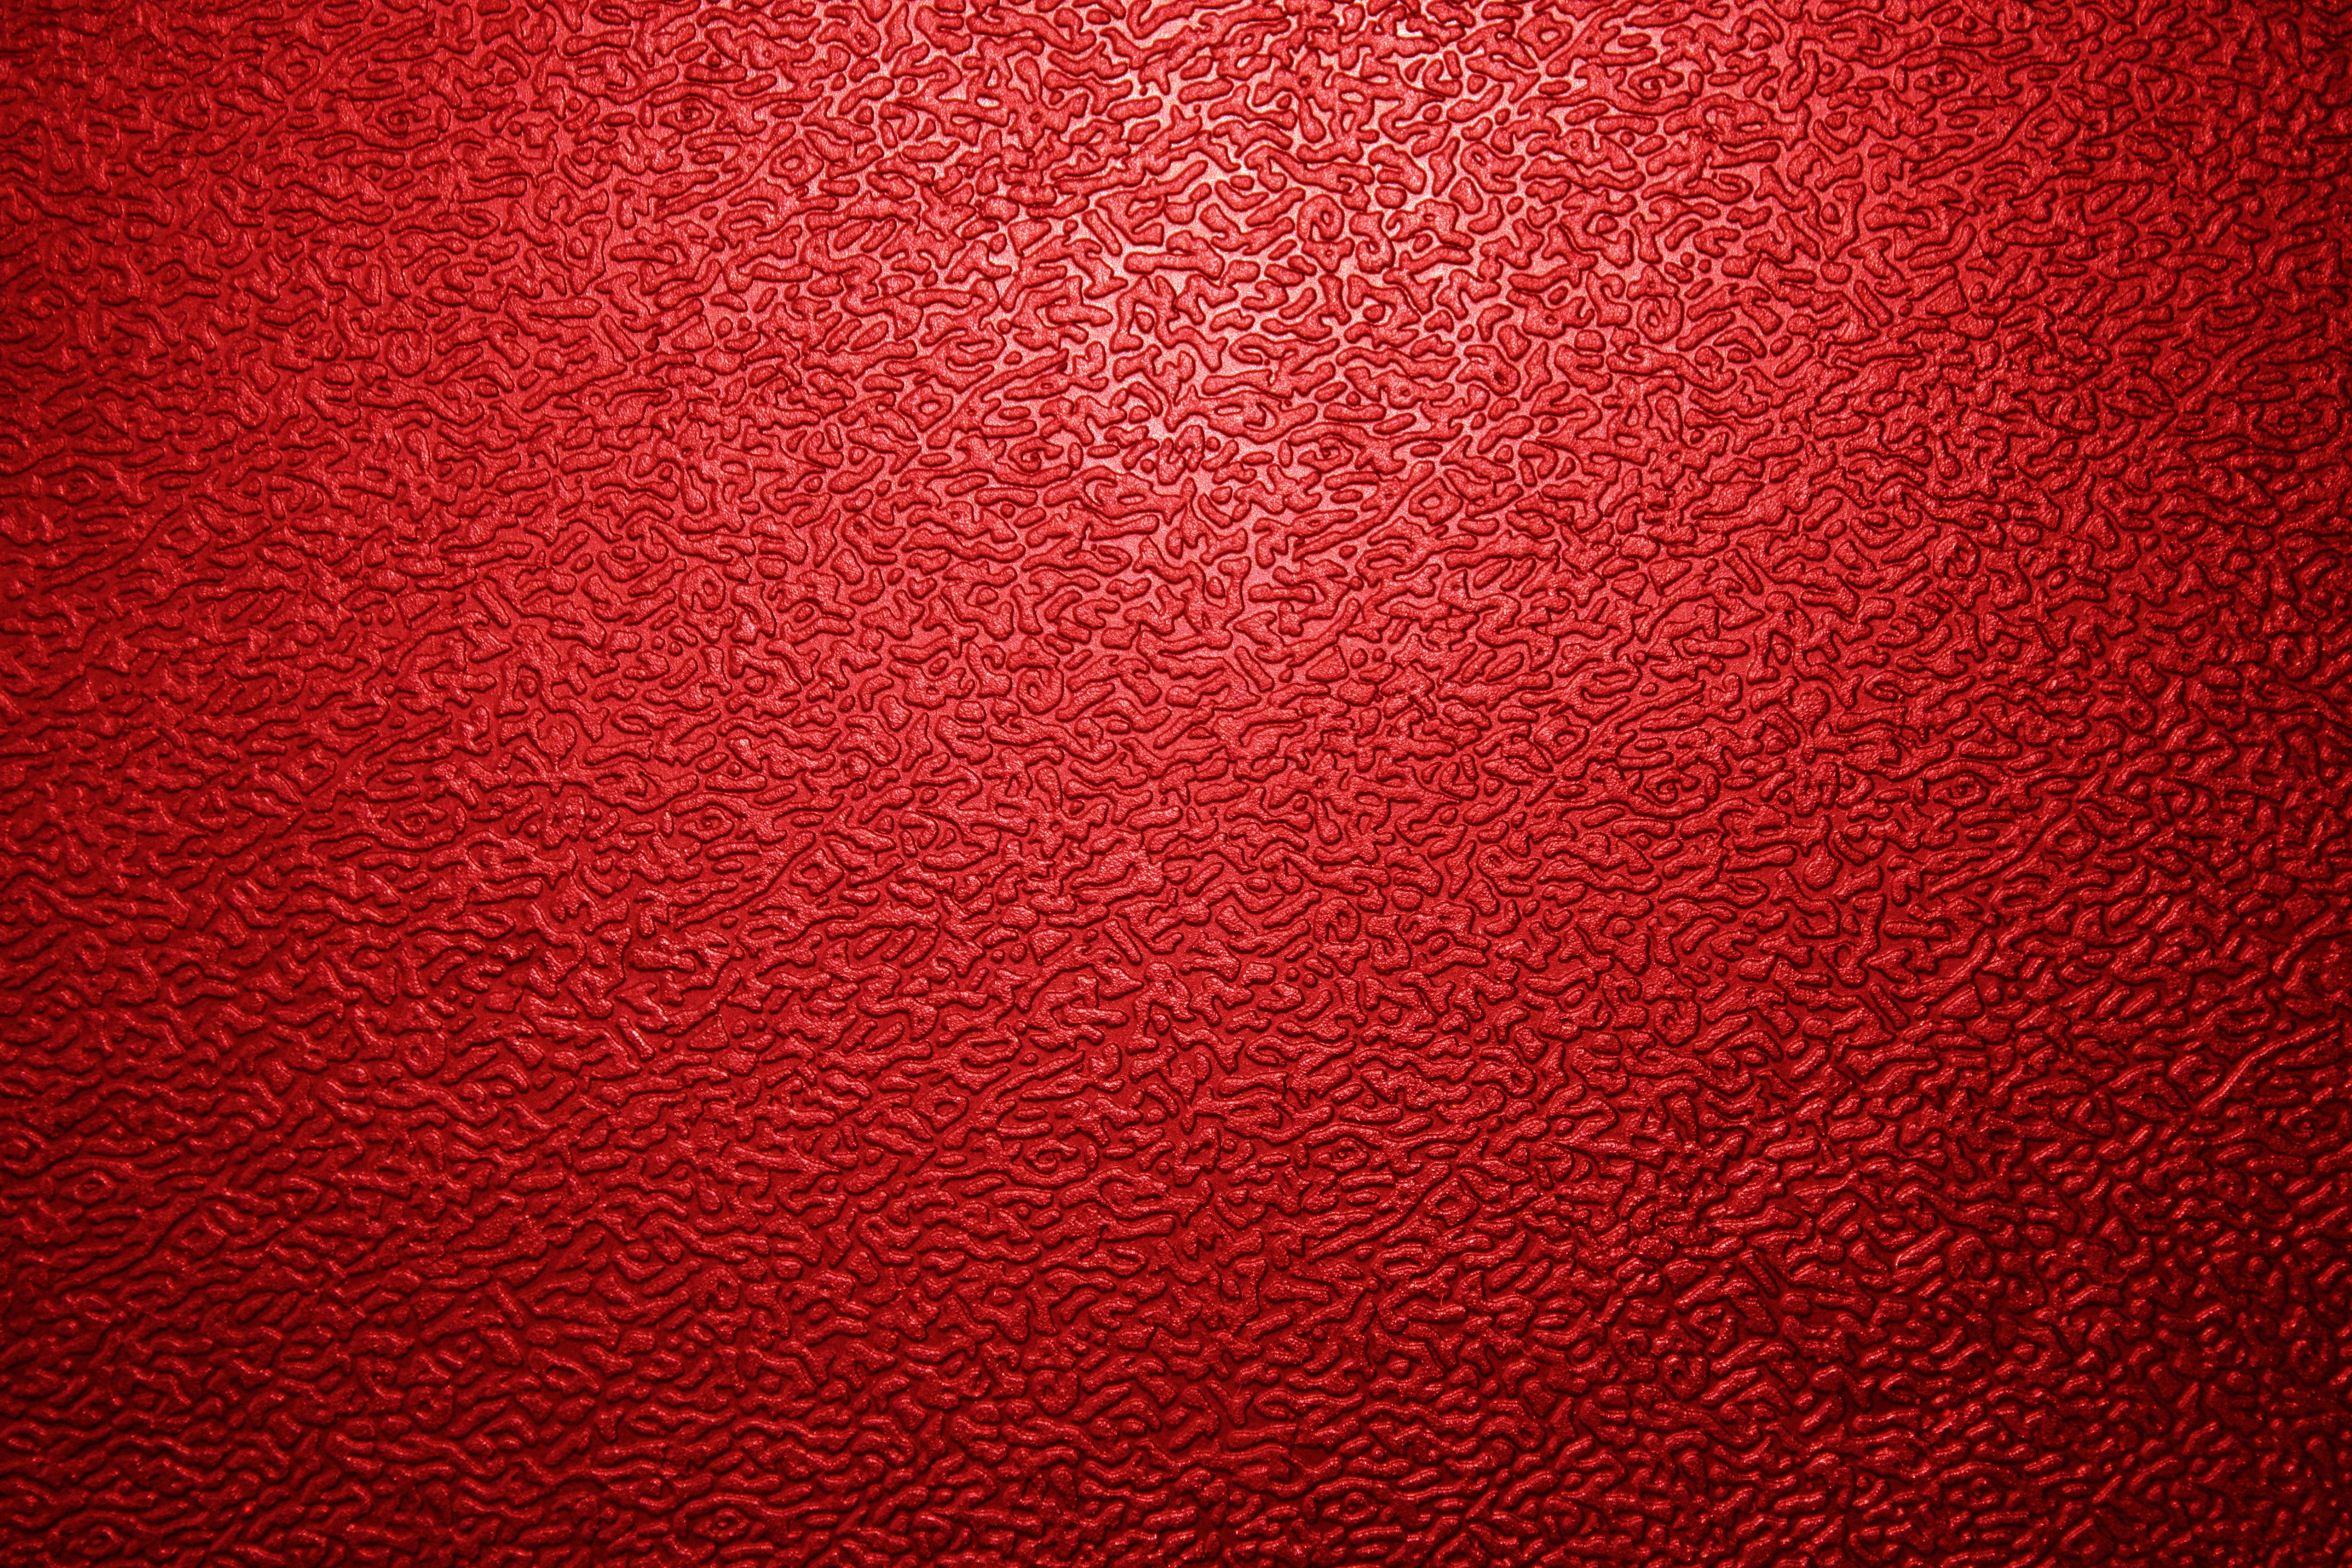 Textured Red Plastic Close Up Picture Photograph Photos